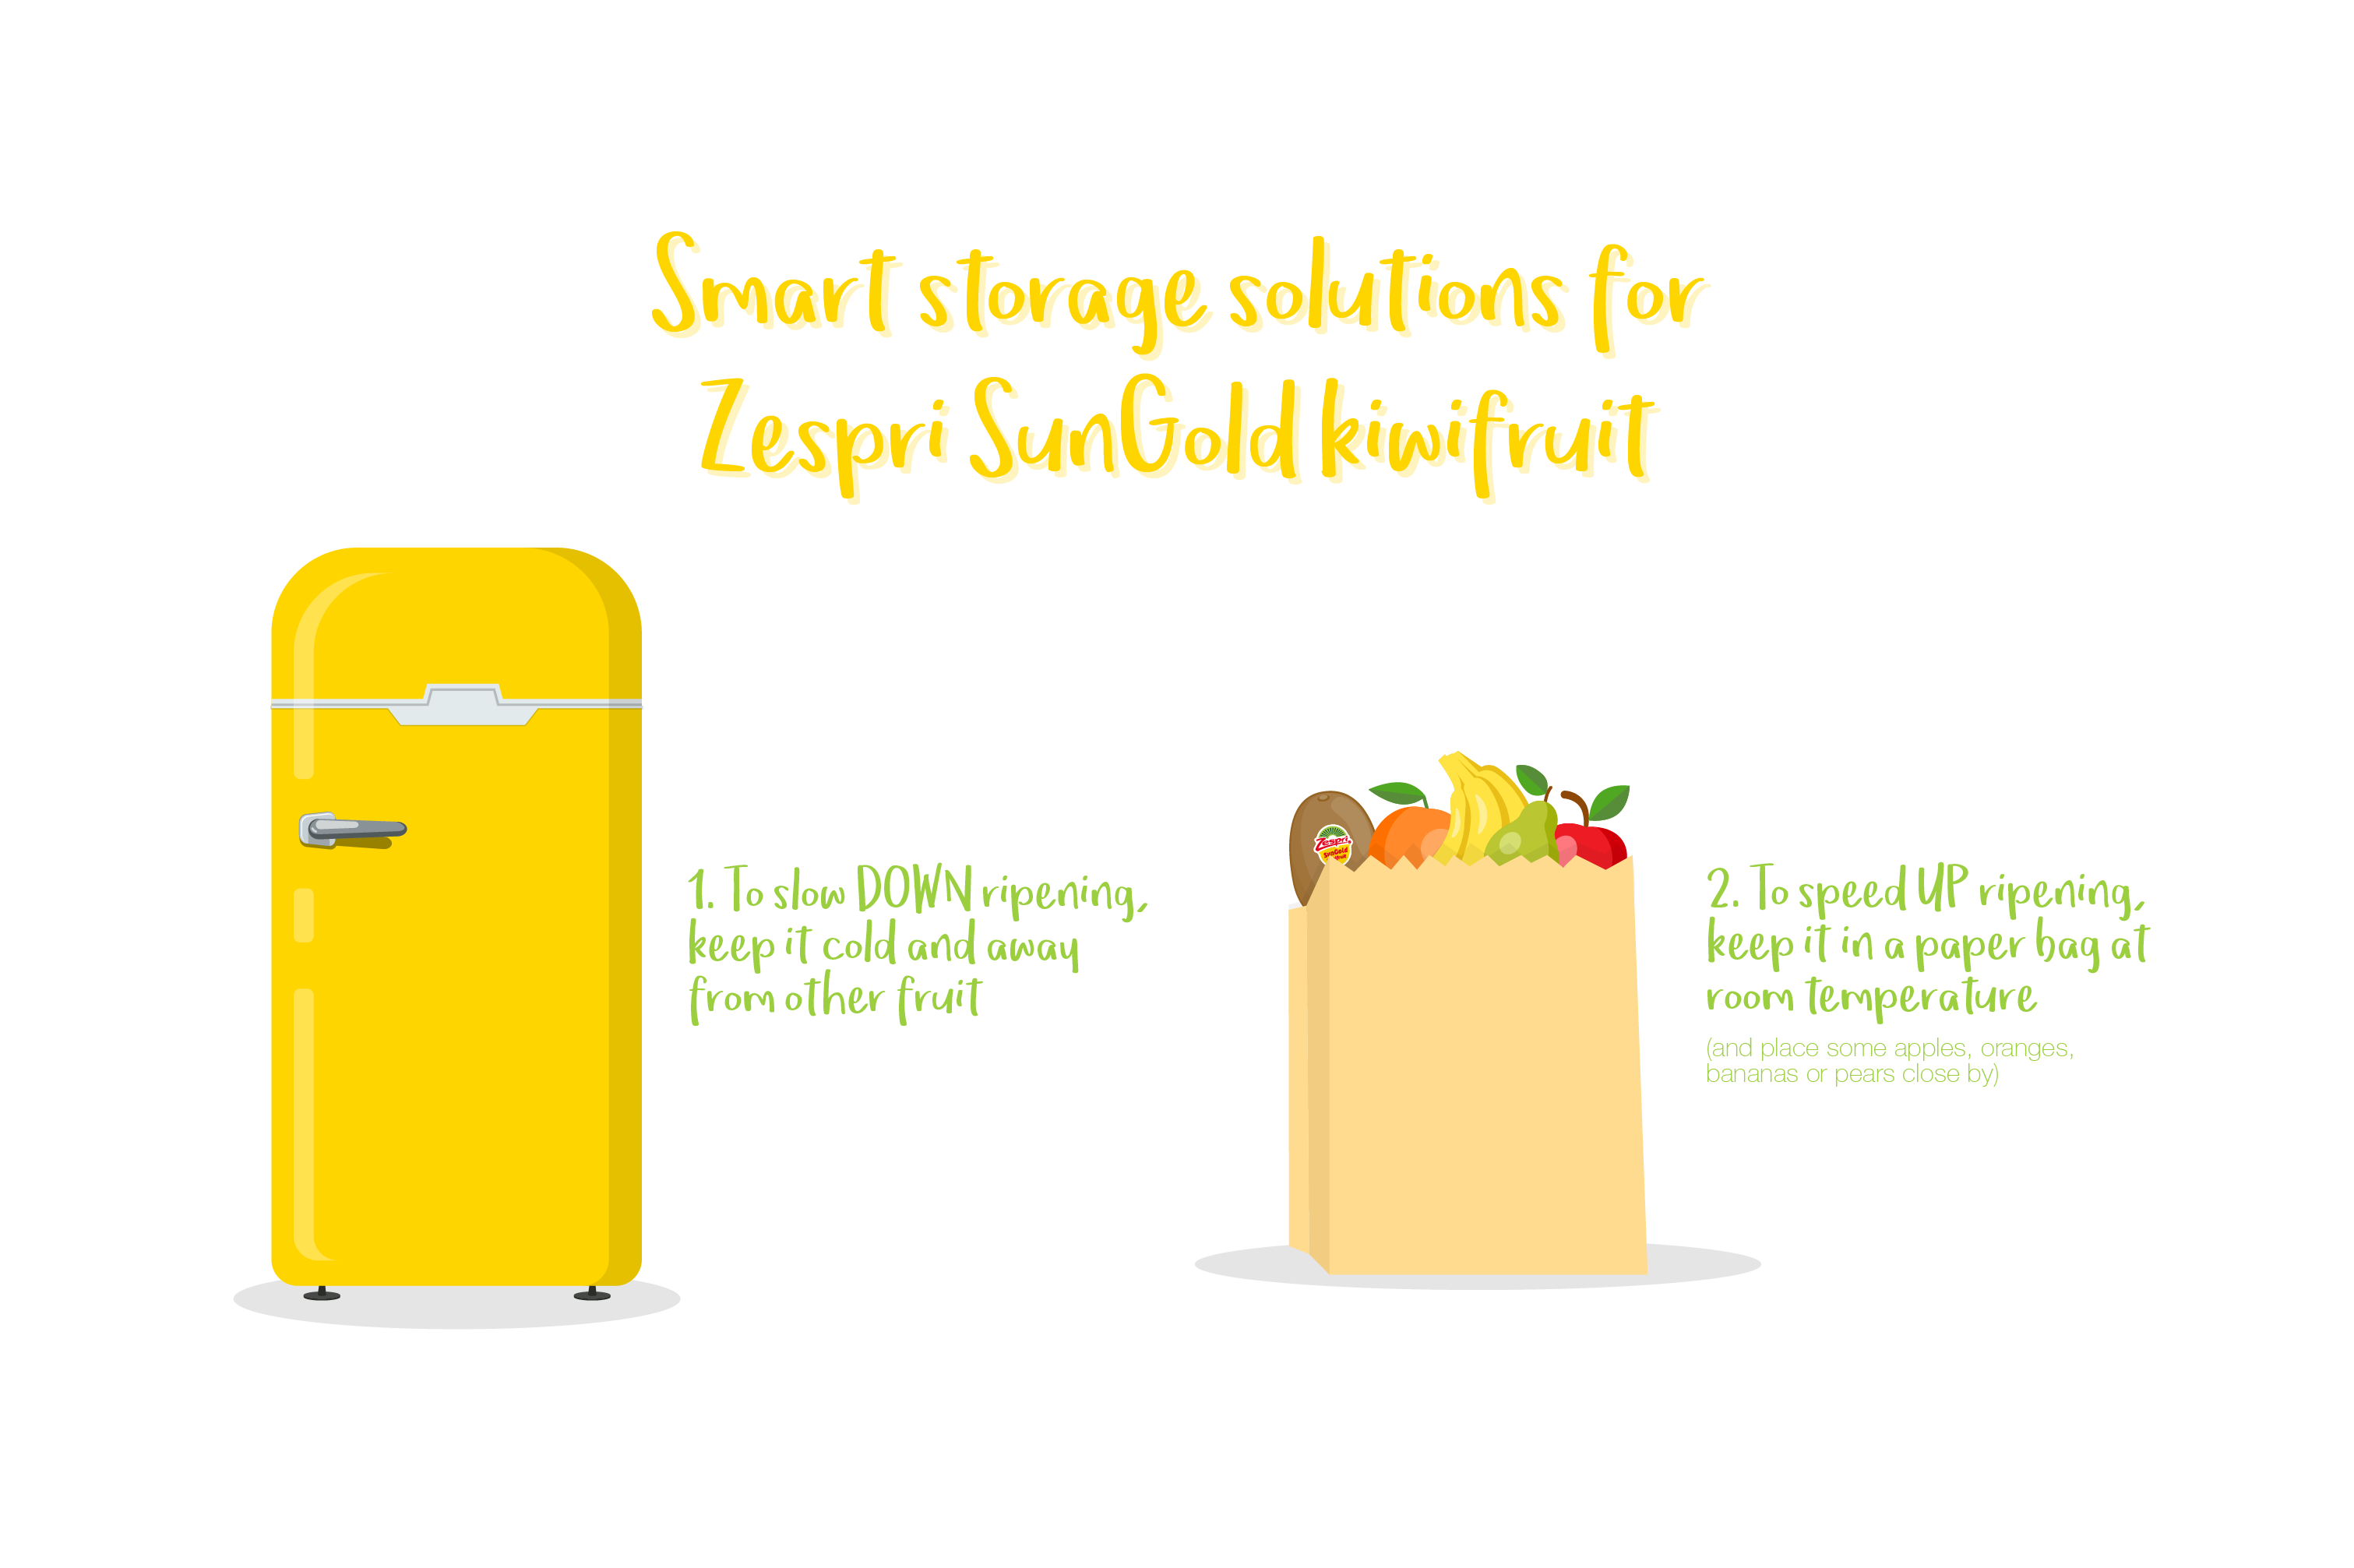 Summer, sun and storage: How to care for your Zespri SunGold kiwifruit!